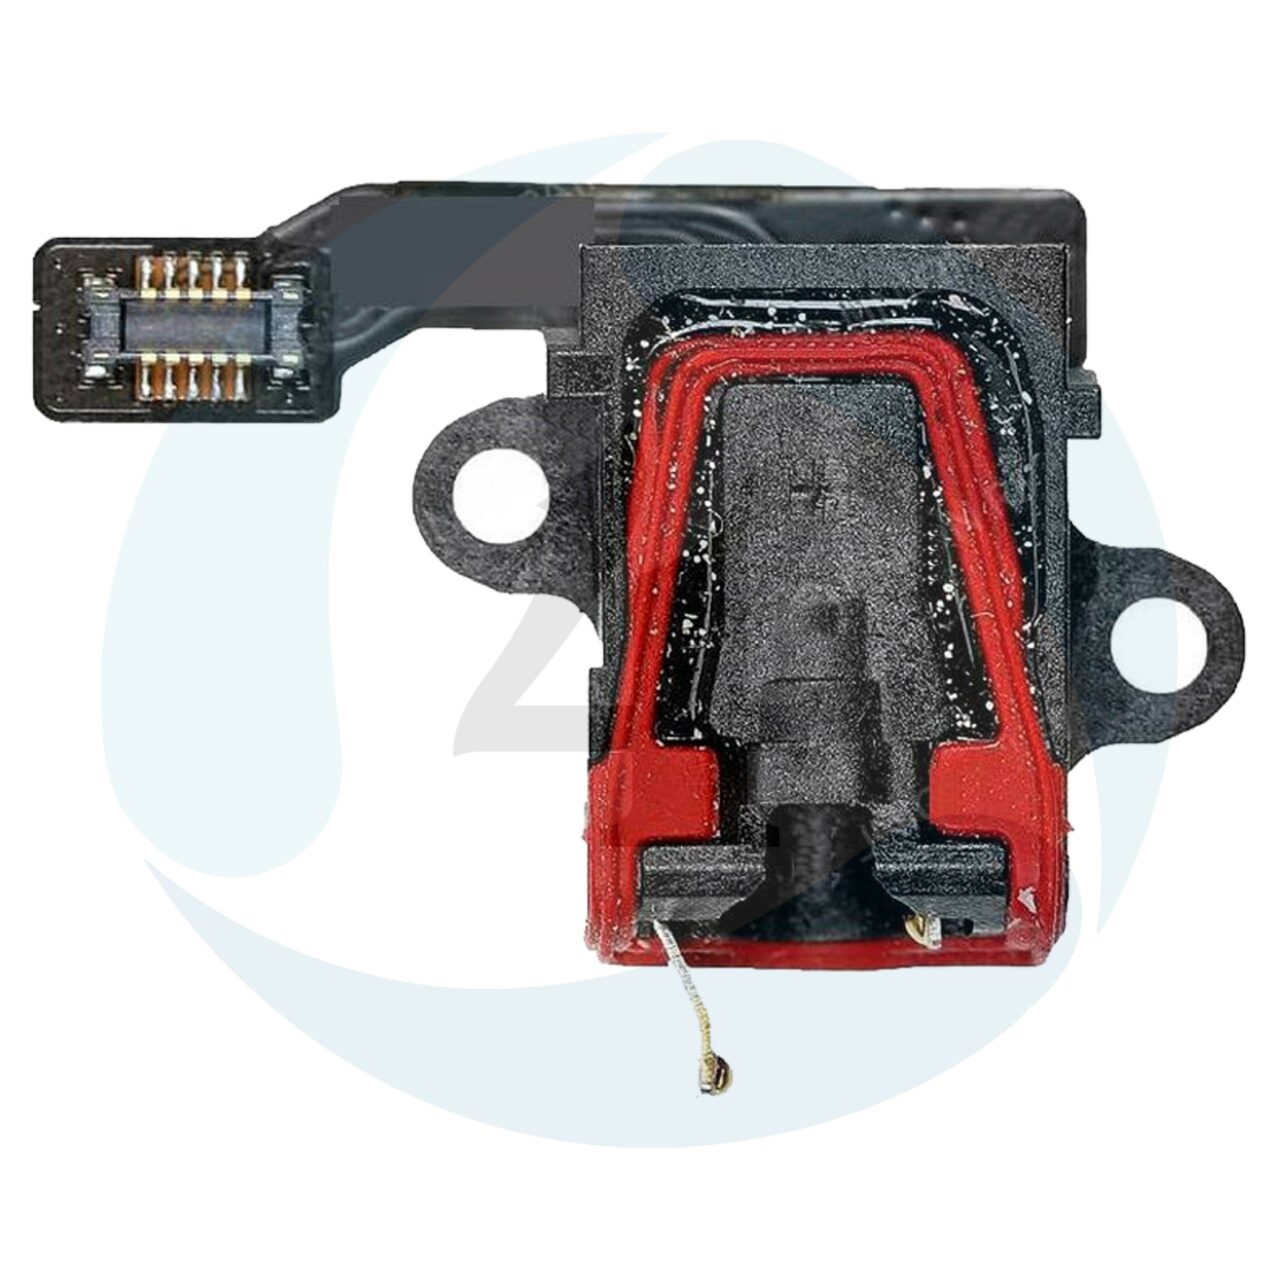 Audio jack flex cable for oneplus 6